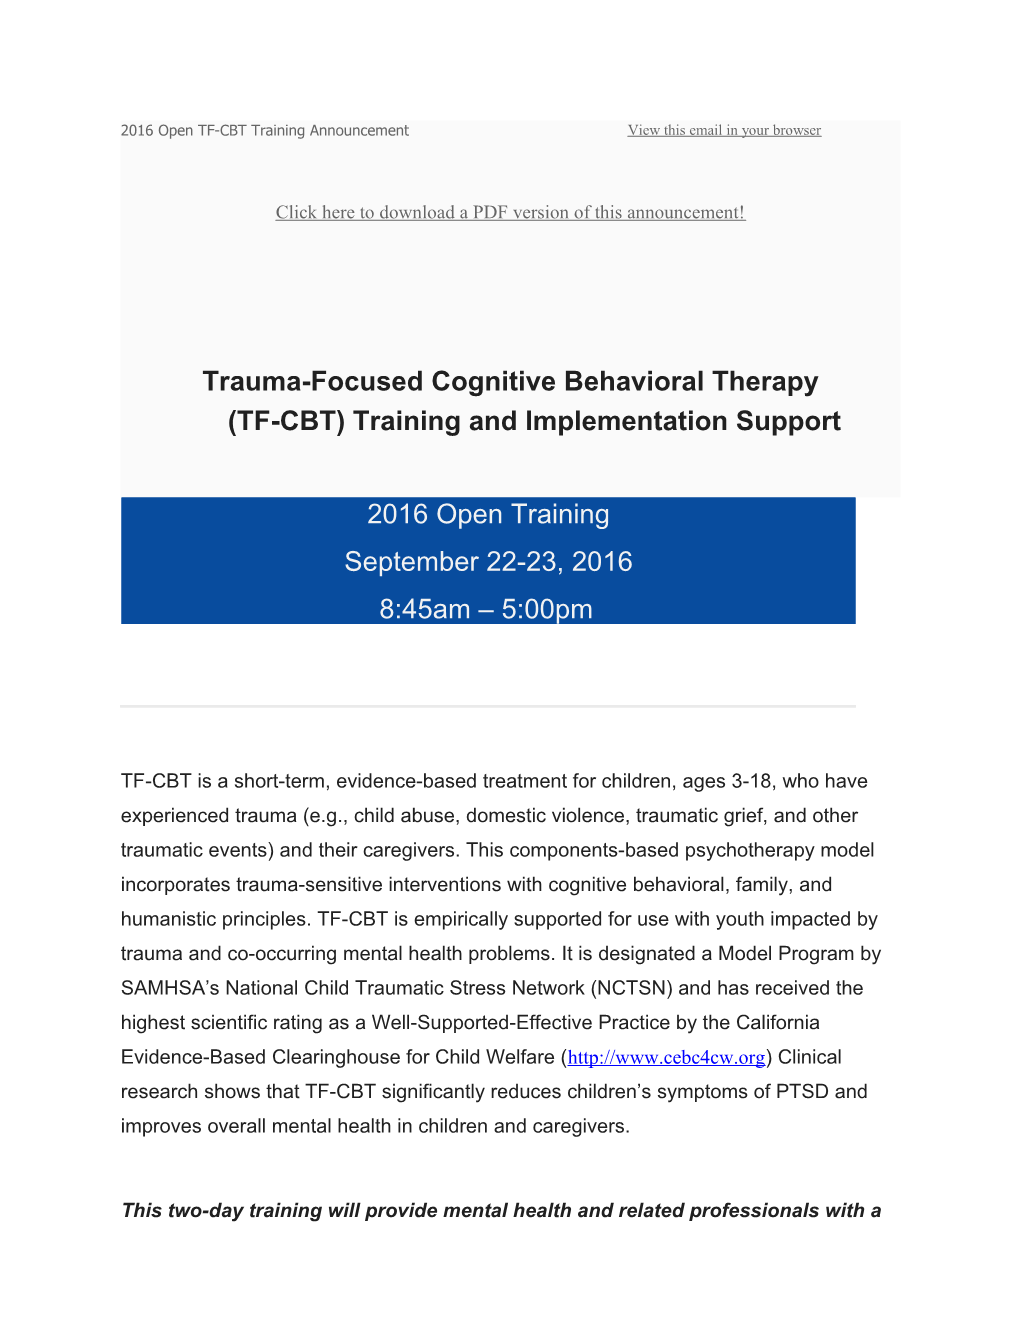 Trauma-Focused Cognitive Behavioral Therapy(TF-CBT) Training and Implementation Support